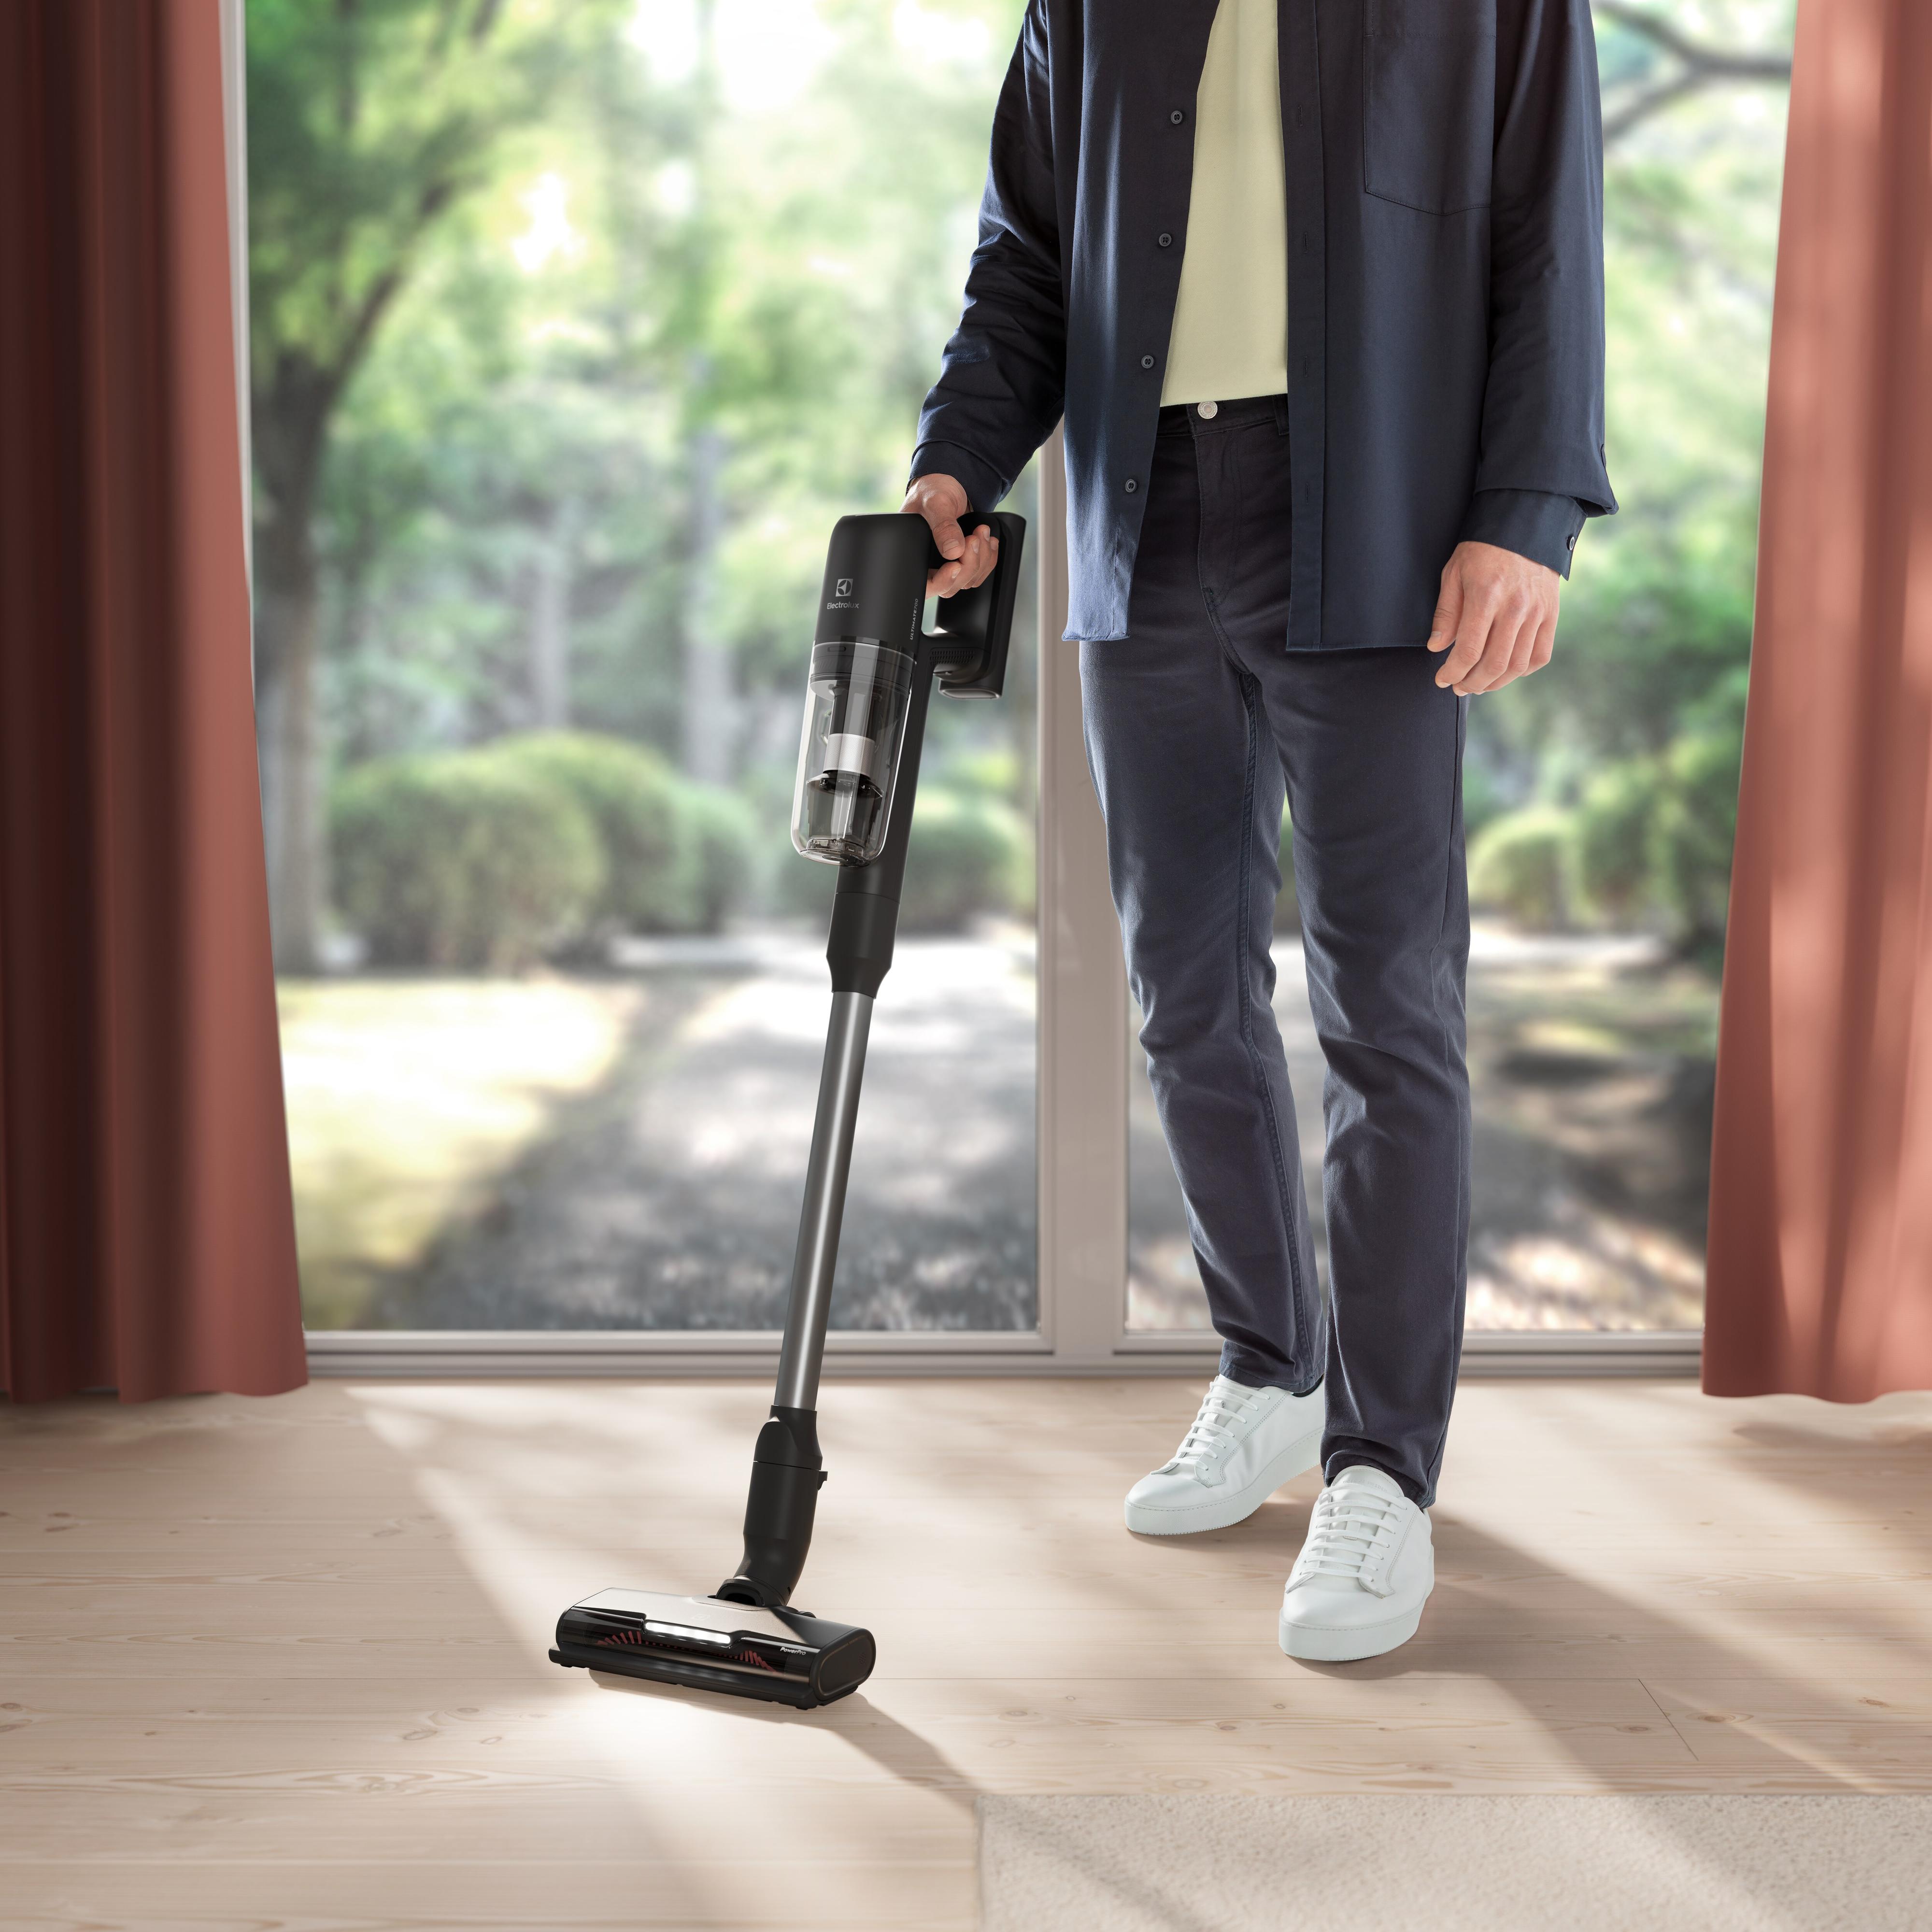 Electrolux Ultimate 700 Cordless vacuum cleaner